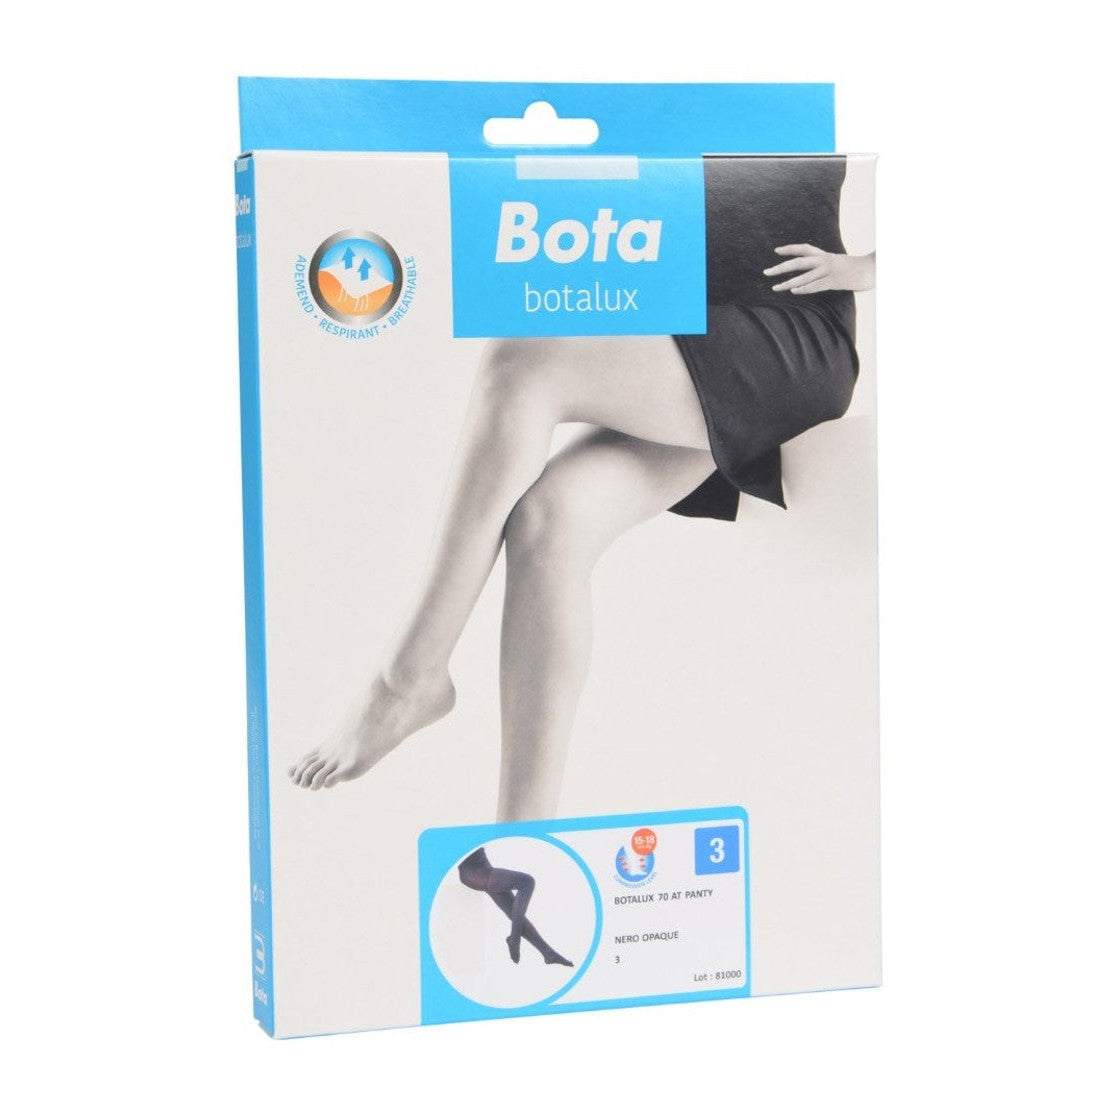 Botalux 70 support tights at nero - black opaque